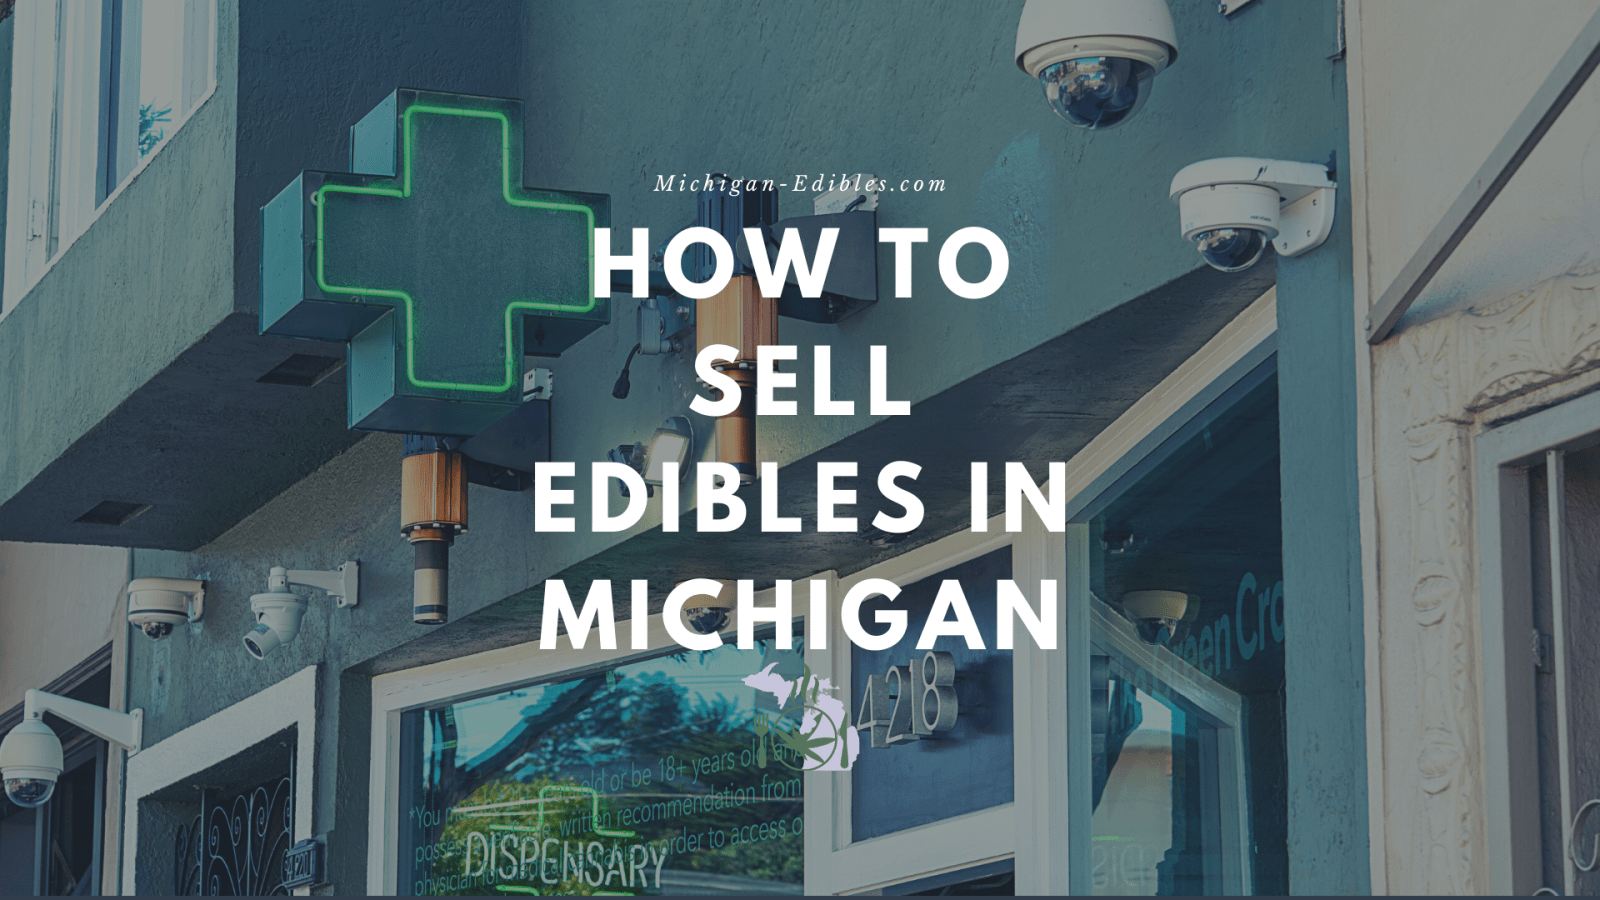 blog of how to sell edibles in Michigan www.michigan-edibles.com